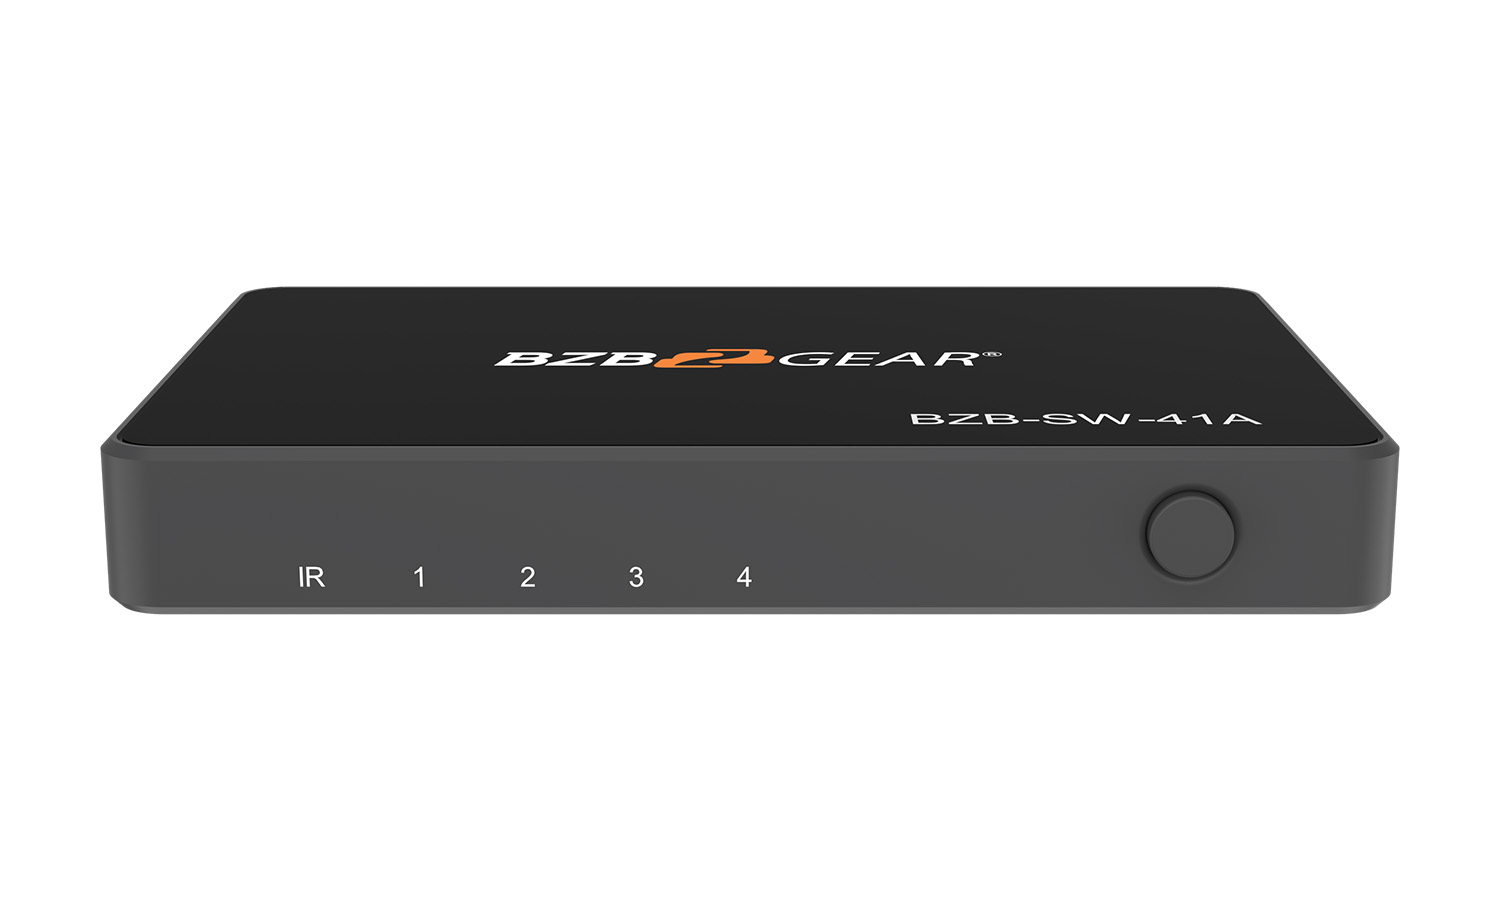 BZB-SW-41A 4K/UHD HDR 4X1 HDMI 2.0 18Gbps Switcher with Remote Control by BZBGEAR